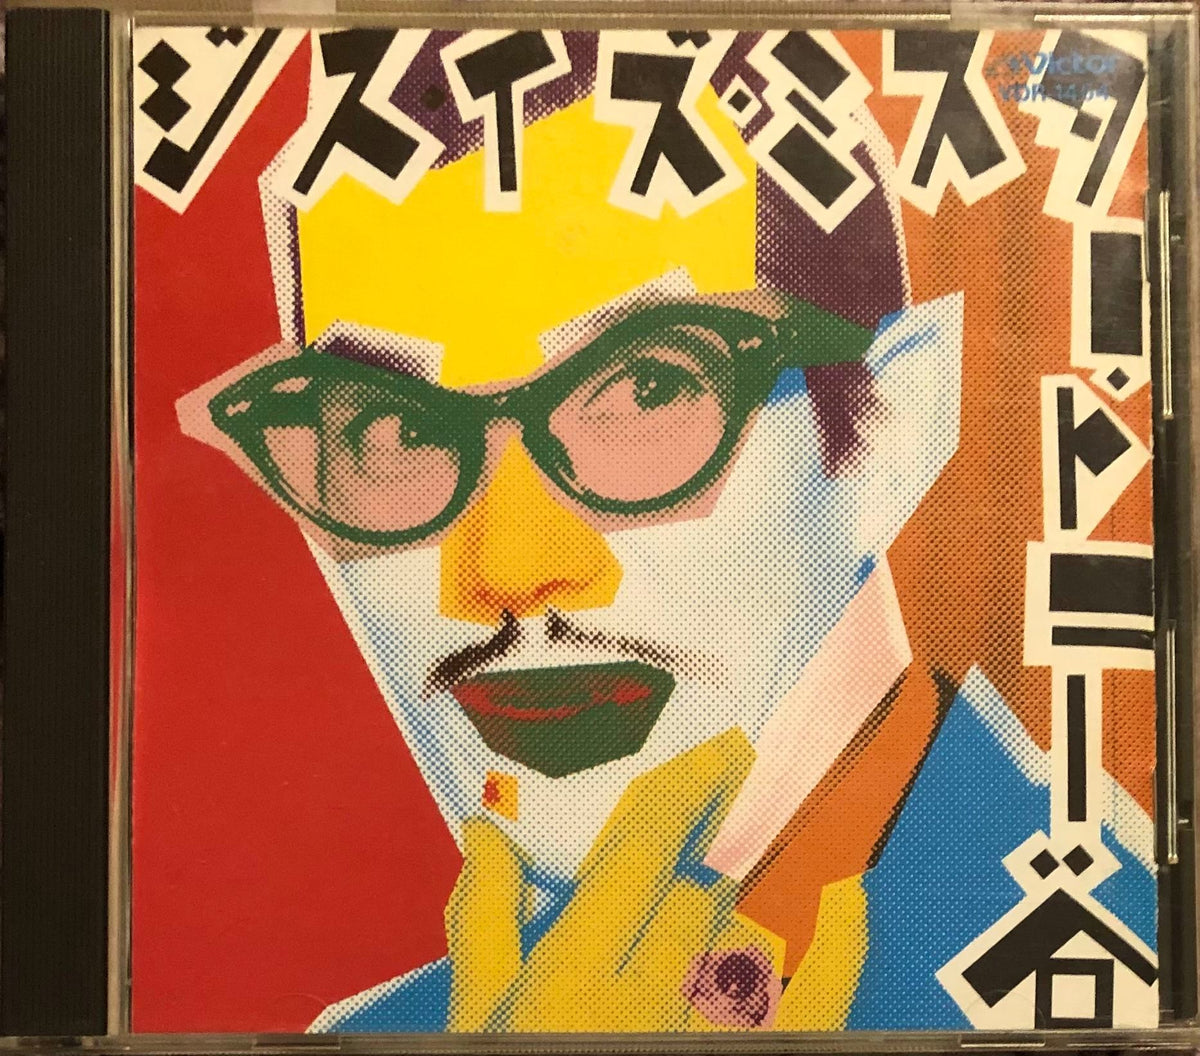 This Is Mister Tony Tani = ジス・イズ・ミスター・トニー谷 